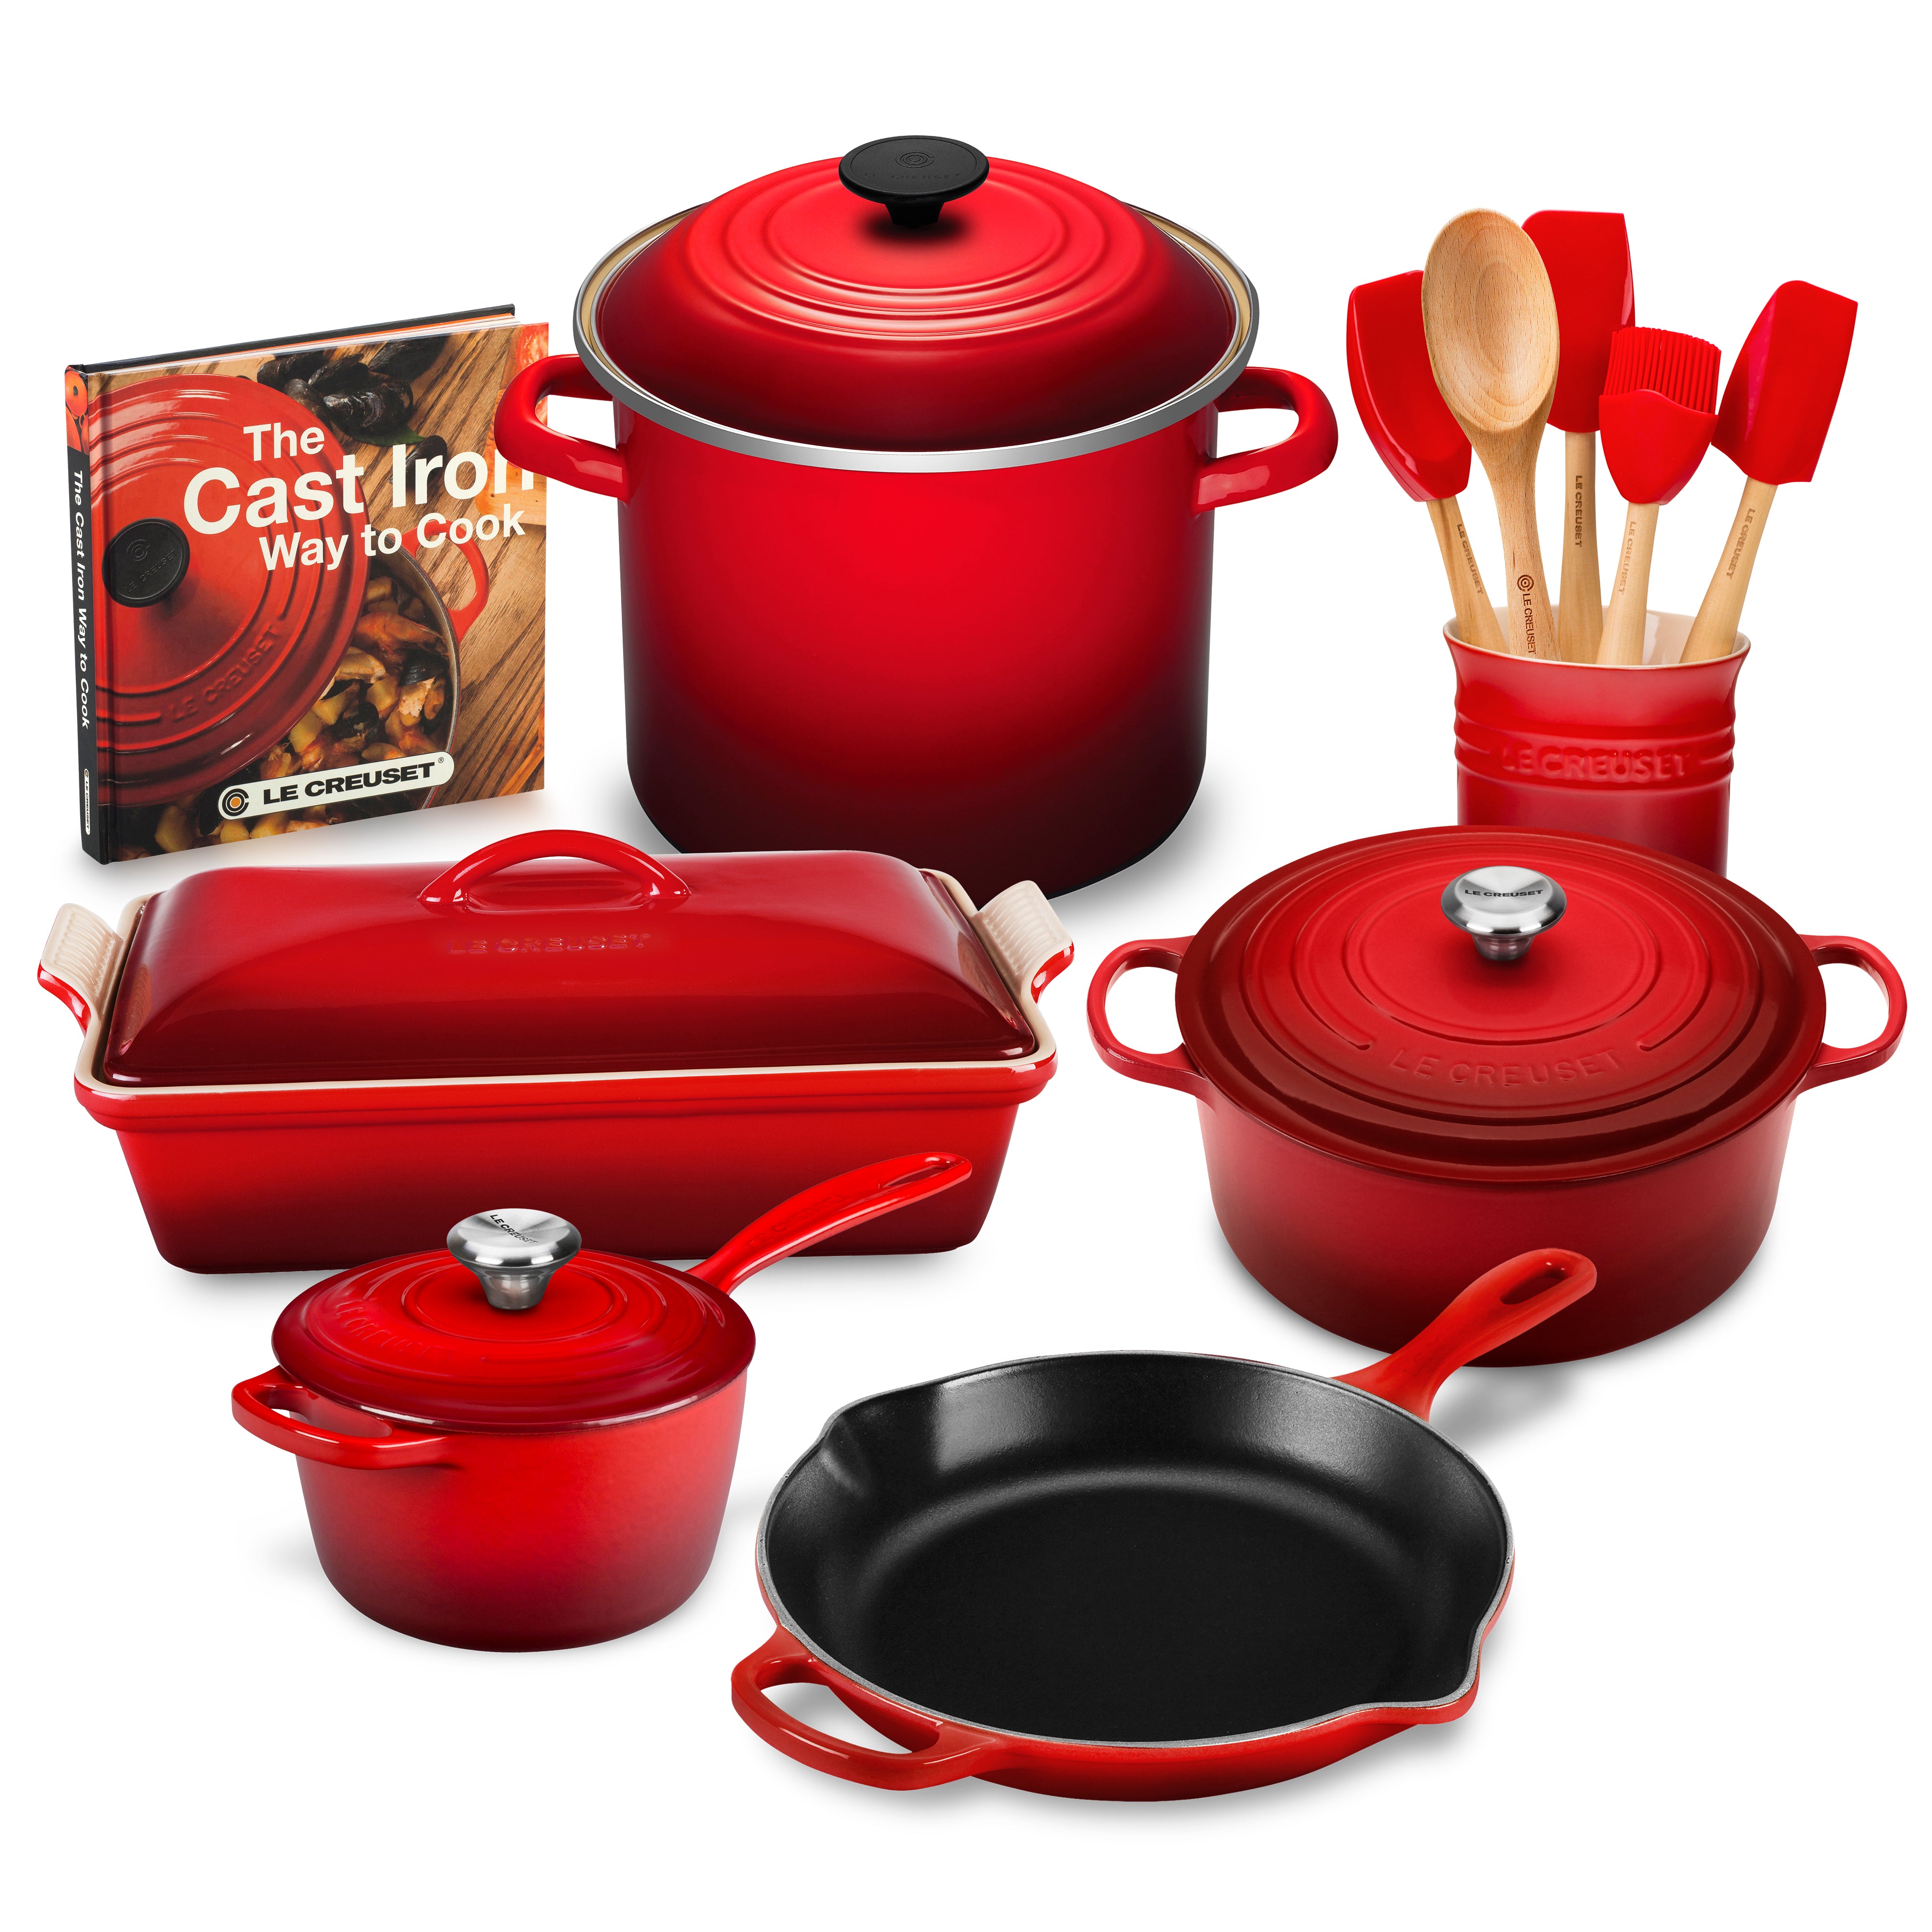  Le Creuset 12 Piece French Countryside Cast-Iron Cookware  Bundle - Cerise: Home & Kitchen